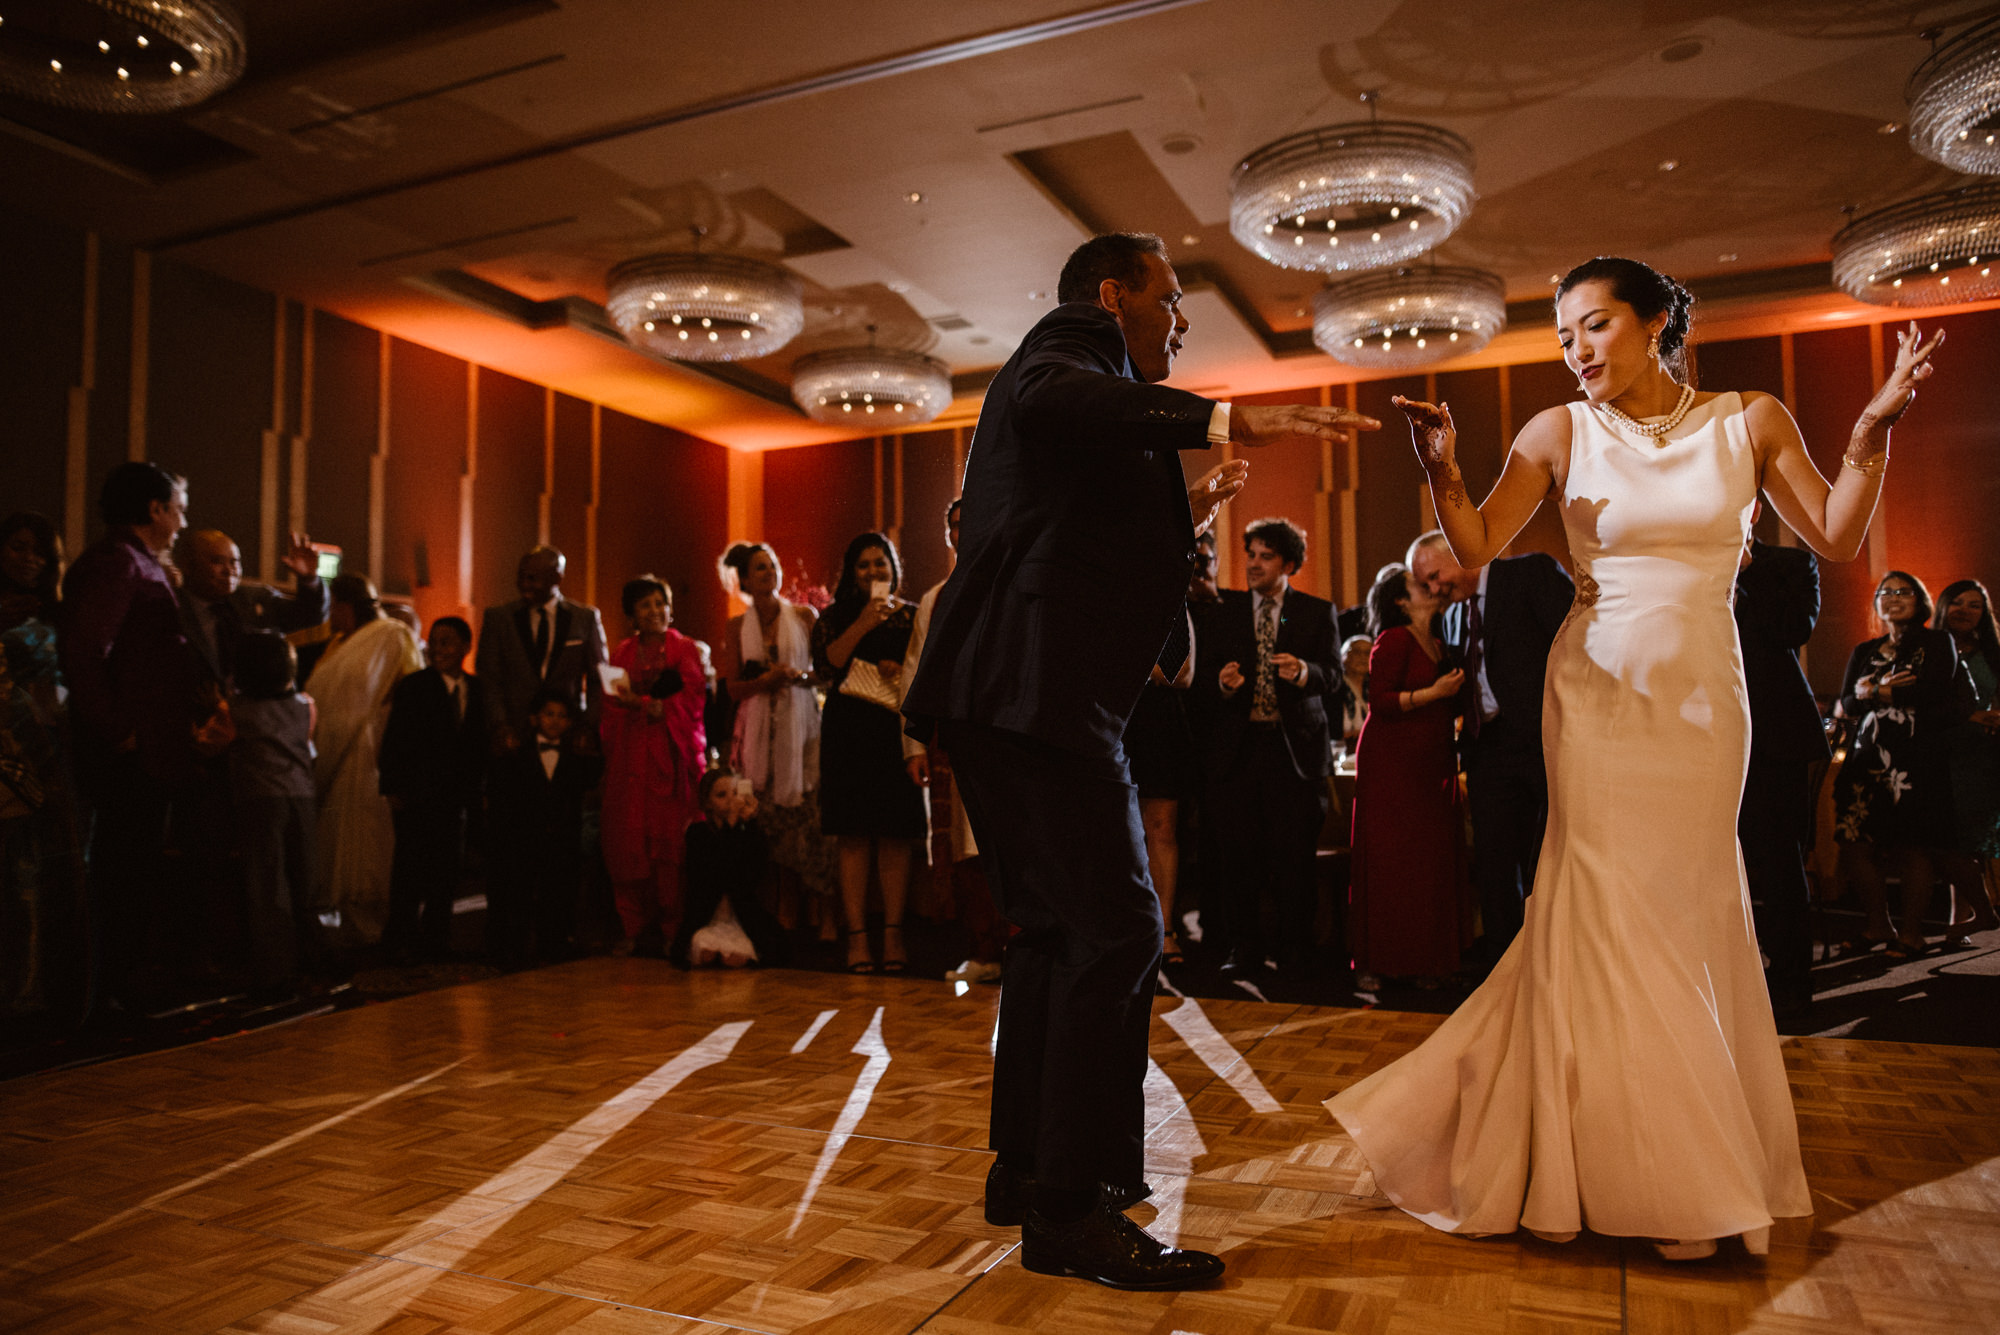 Julie dances with a favorite uncle at her wedding reception at the Four Seasons